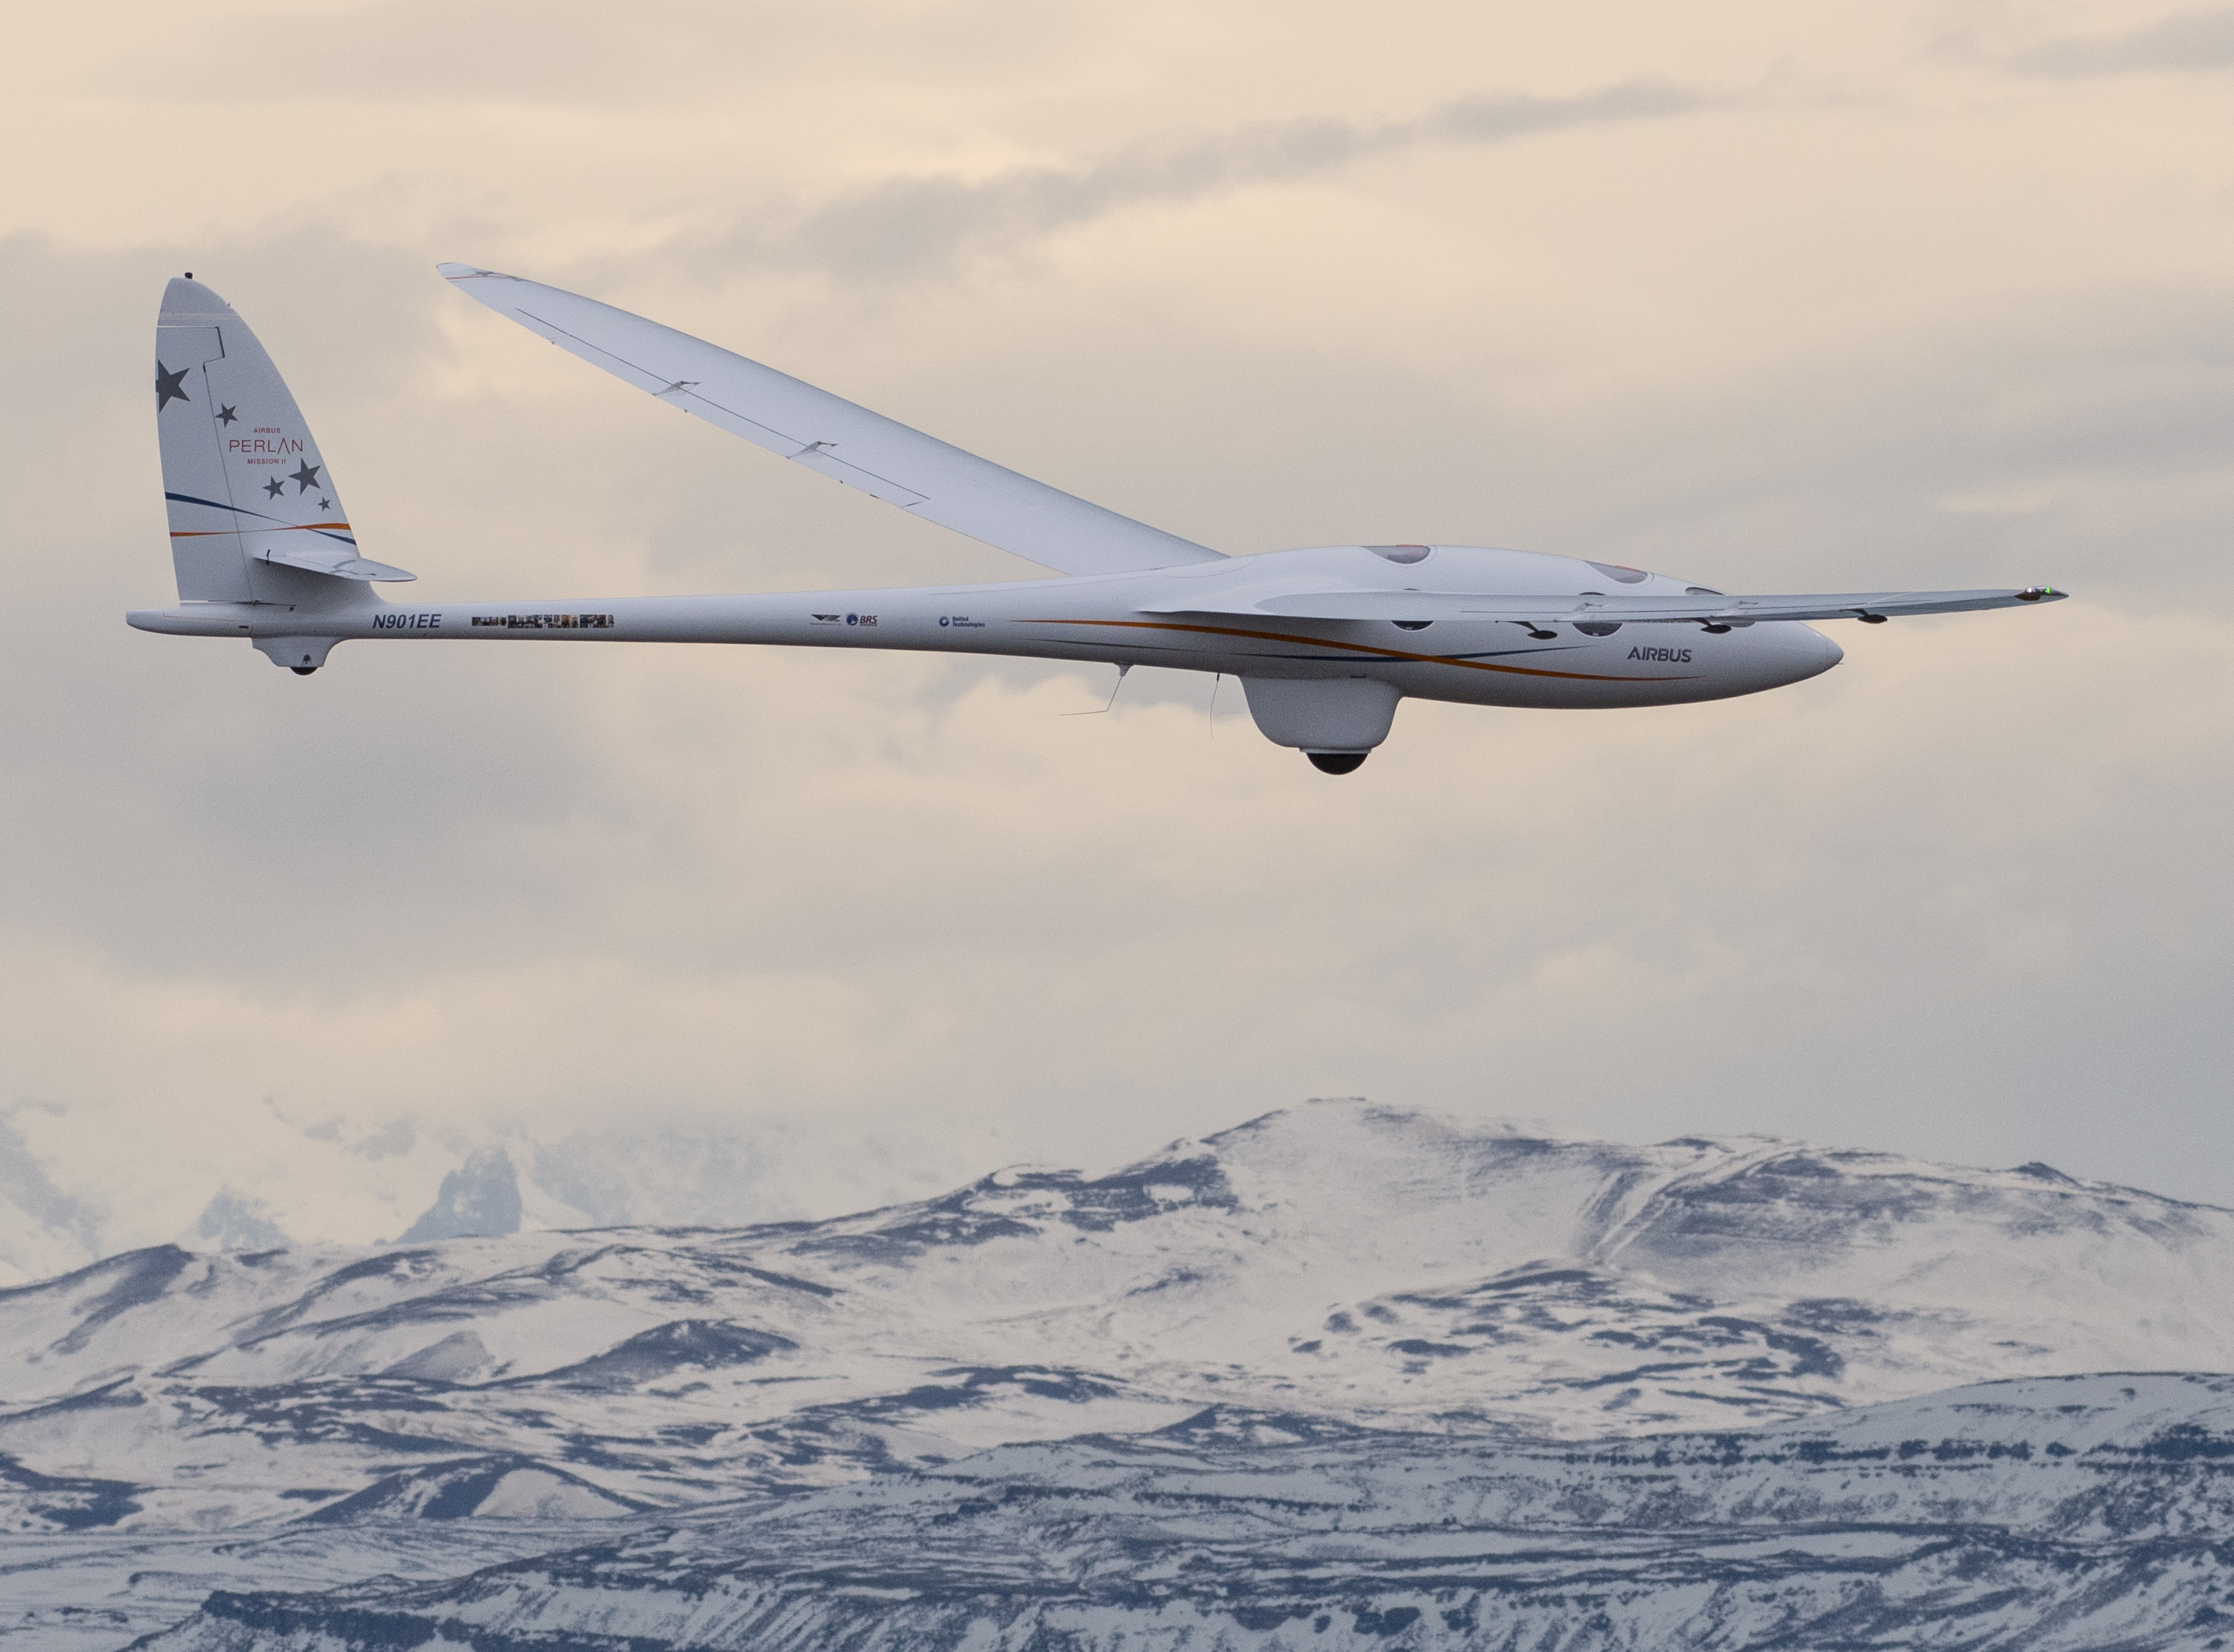 Airbus Perlan Mission II -- over the Andes